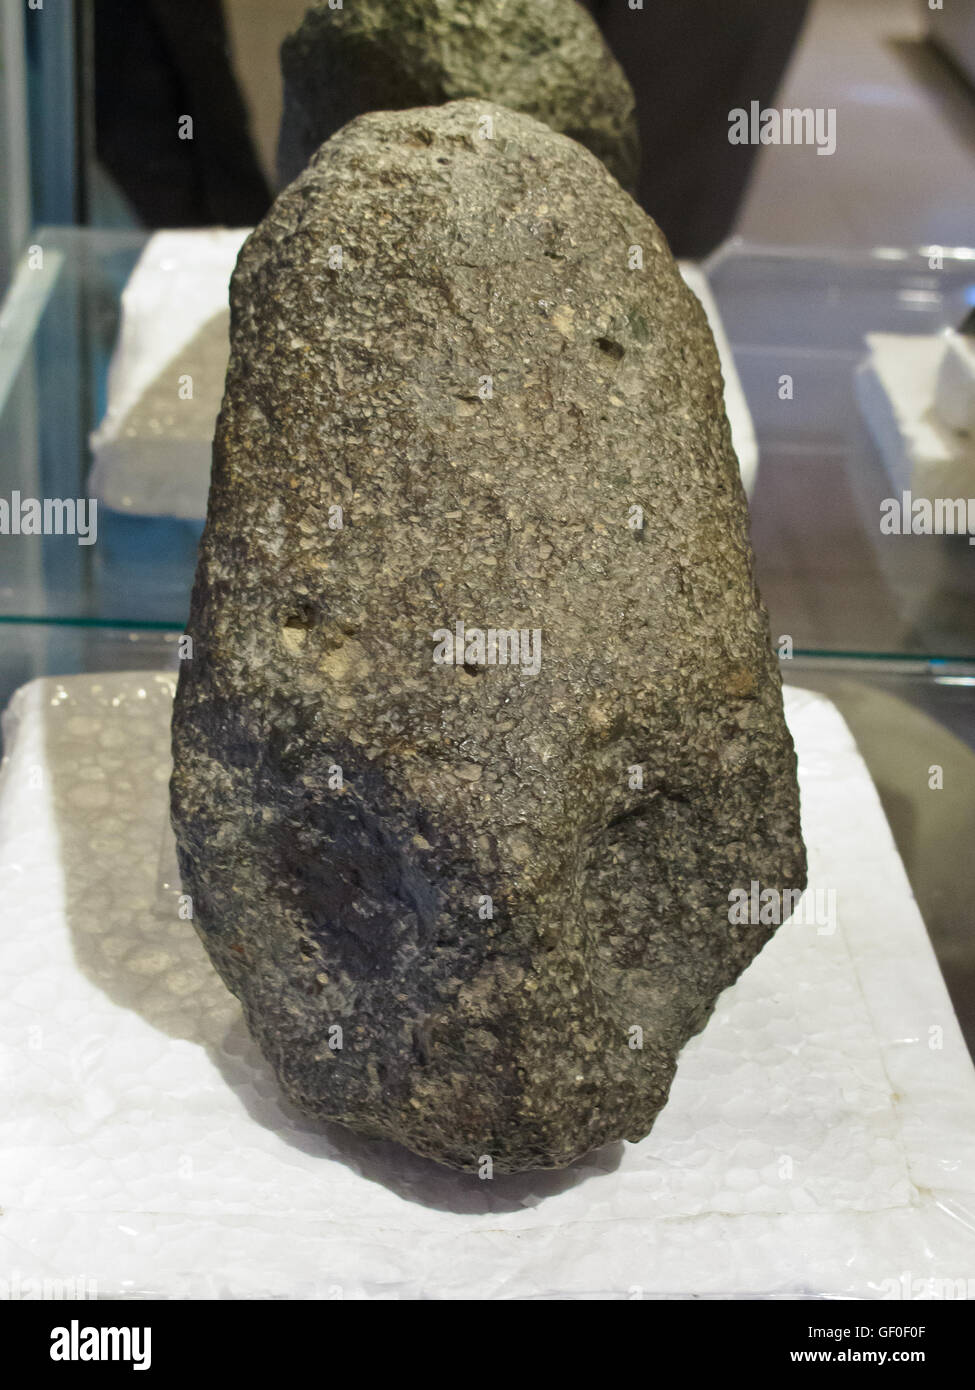 The stone showing the elongated human head can be found in the Paracas history museum Stock Photo